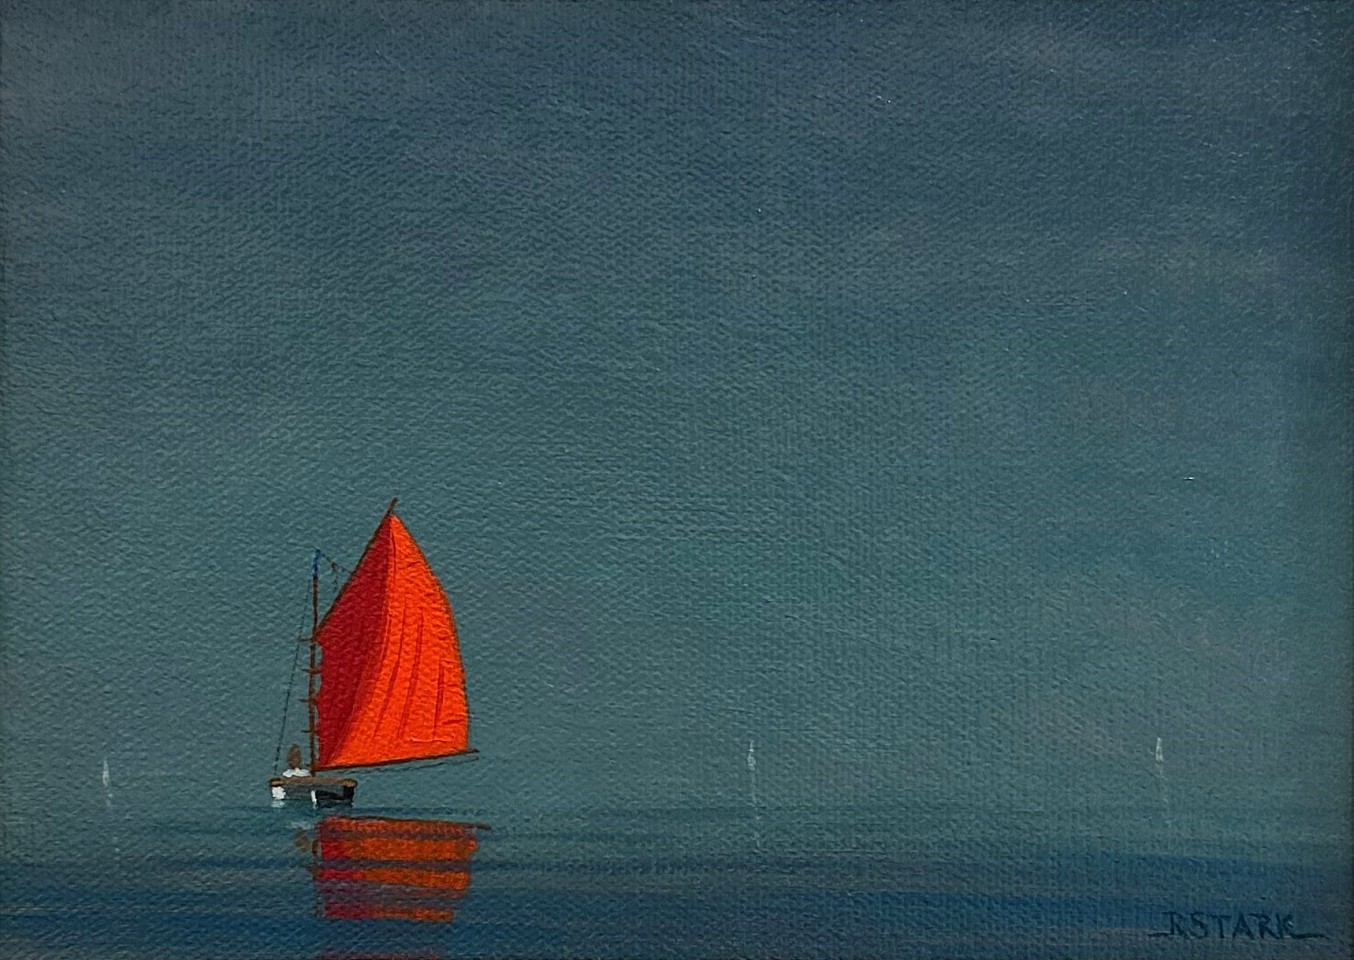 Robert Stark, Jr., Red Sail in The Sound
oil on panel, 8 in. (20.3 cm)